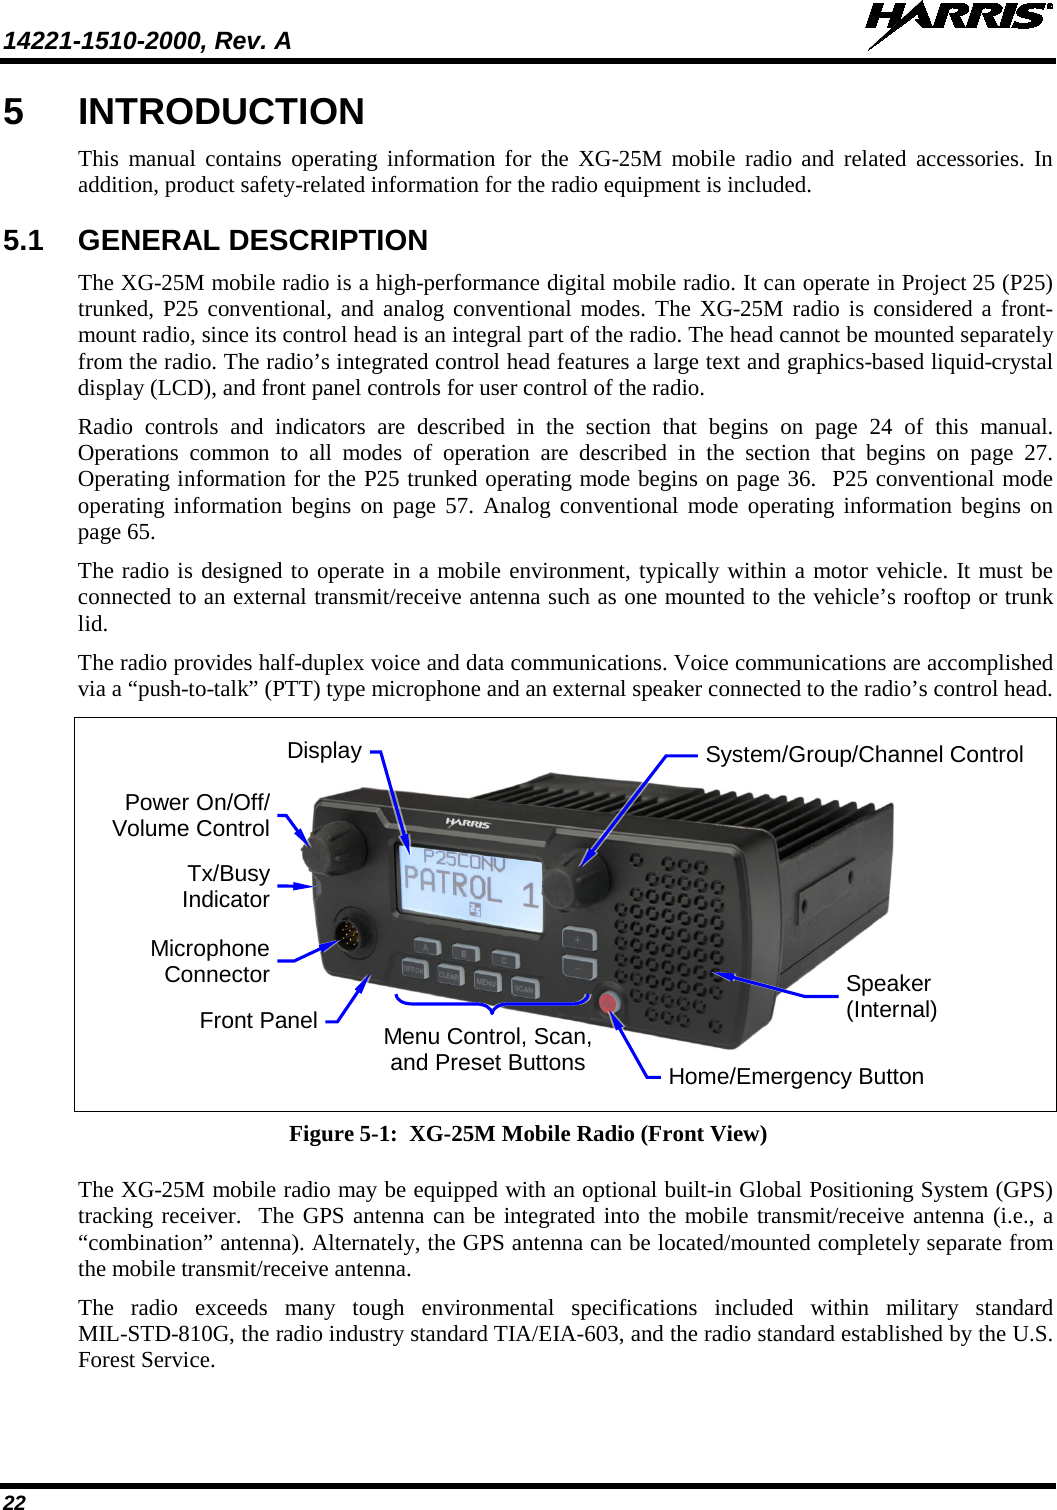 14221-1510-2000, Rev. A   22 5  INTRODUCTION This manual contains operating  information for the XG-25M  mobile radio and related accessories. In addition, product safety-related information for the radio equipment is included. 5.1 GENERAL DESCRIPTION The XG-25M mobile radio is a high-performance digital mobile radio. It can operate in Project 25 (P25) trunked, P25 conventional, and analog conventional modes. The XG-25M radio is considered a front-mount radio, since its control head is an integral part of the radio. The head cannot be mounted separately from the radio. The radio’s integrated control head features a large text and graphics-based liquid-crystal display (LCD), and front panel controls for user control of the radio. Radio controls and indicators are described in the section that begins on page 24  of this manual. Operations common to all modes of operation are described in the section that begins on page 27. Operating information for the P25 trunked operating mode begins on page 36.  P25 conventional mode operating information begins  on page 57. Analog conventional mode operating information begins on page 65. The radio is designed to operate in a mobile environment, typically within a motor vehicle. It must be connected to an external transmit/receive antenna such as one mounted to the vehicle’s rooftop or trunk lid. The radio provides half-duplex voice and data communications. Voice communications are accomplished via a “push-to-talk” (PTT) type microphone and an external speaker connected to the radio’s control head.       Figure 5-1:  XG-25M Mobile Radio (Front View)  The XG-25M mobile radio may be equipped with an optional built-in Global Positioning System (GPS) tracking receiver.  The GPS antenna can be integrated into the mobile transmit/receive antenna (i.e., a “combination” antenna). Alternately, the GPS antenna can be located/mounted completely separate from the mobile transmit/receive antenna.  The  radio  exceeds  many  tough environmental specifications included within military standard MIL-STD-810G, the radio industry standard TIA/EIA-603, and the radio standard established by the U.S. Forest Service. Power On/Off/ Volume Control Microphone Connector Tx/Busy Indicator Speaker (Internal) Home/Emergency Button Menu Control, Scan, and Preset Buttons Front Panel System/Group/Channel Control Display 